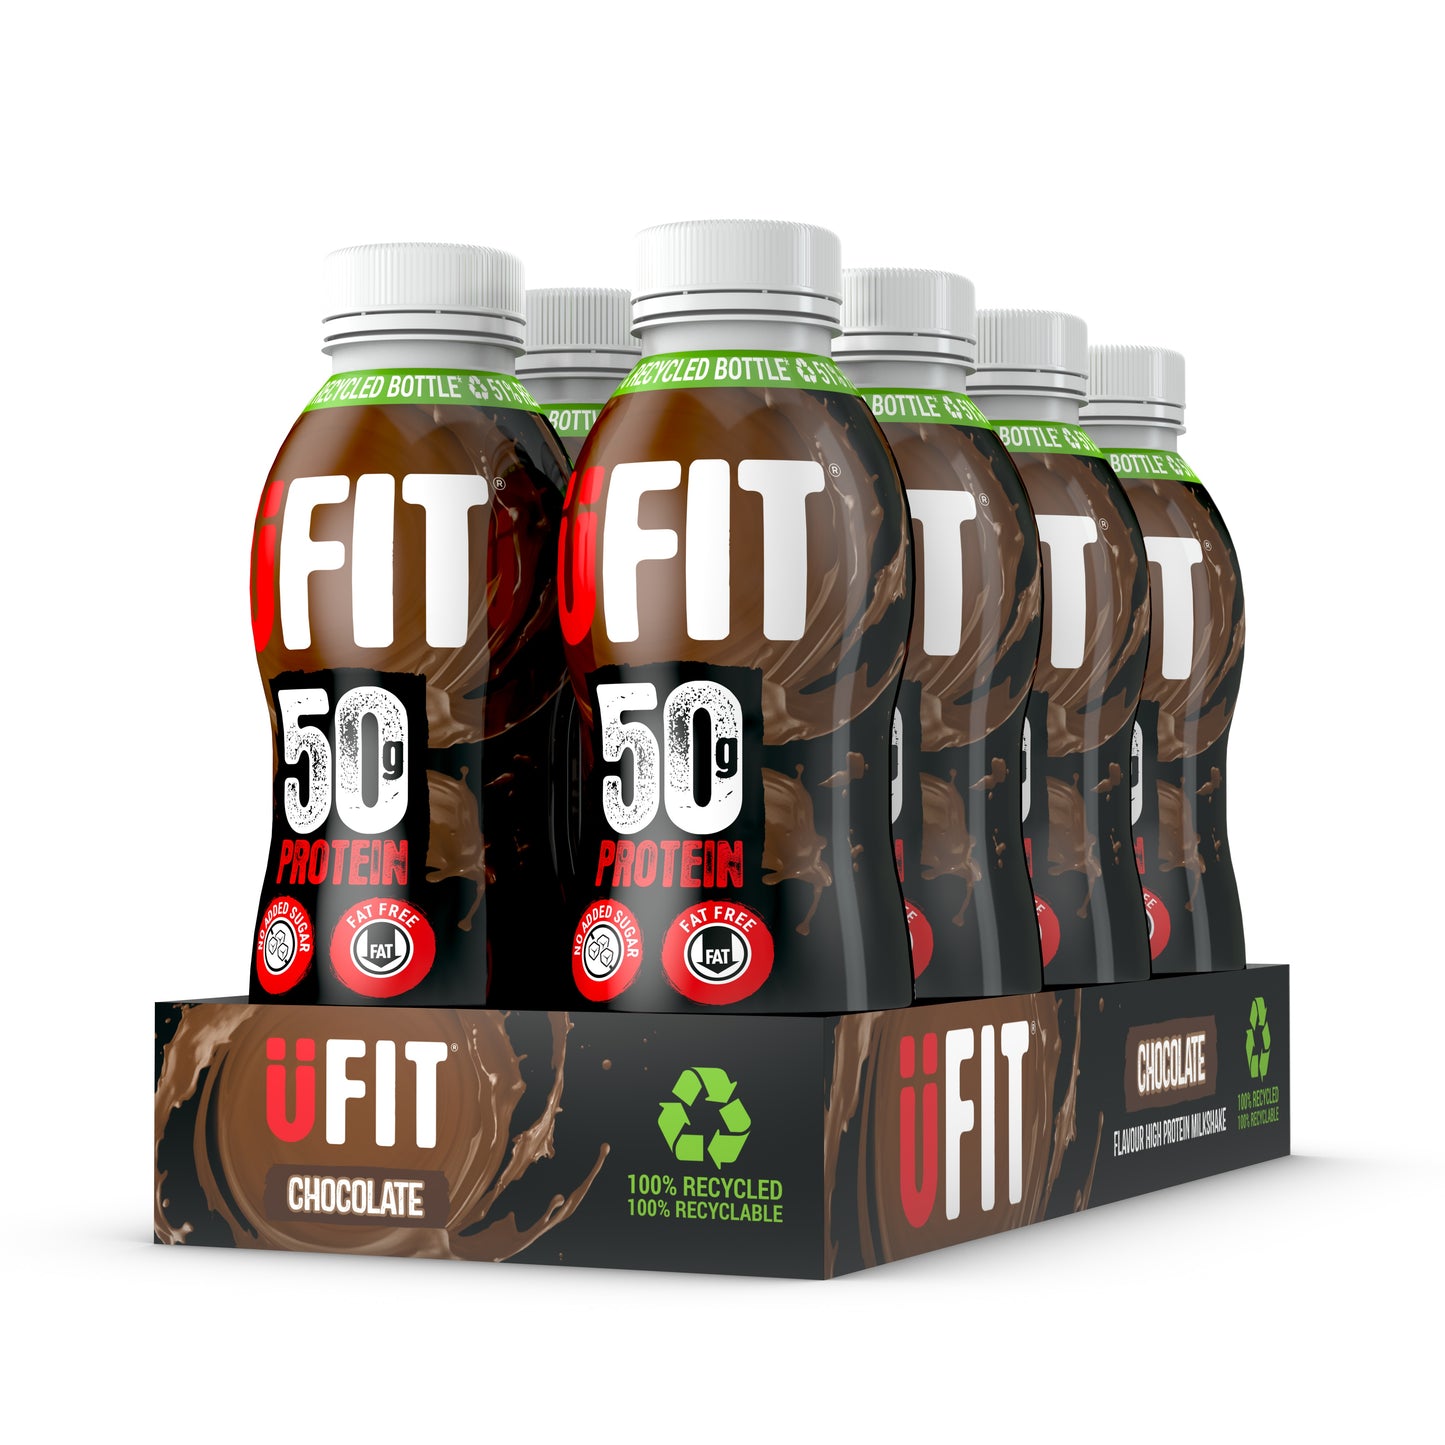 UFIT 50G HIGH PROTEIN SHAKE DRINK – 8 x 500ML (PACKS MAY VARY)